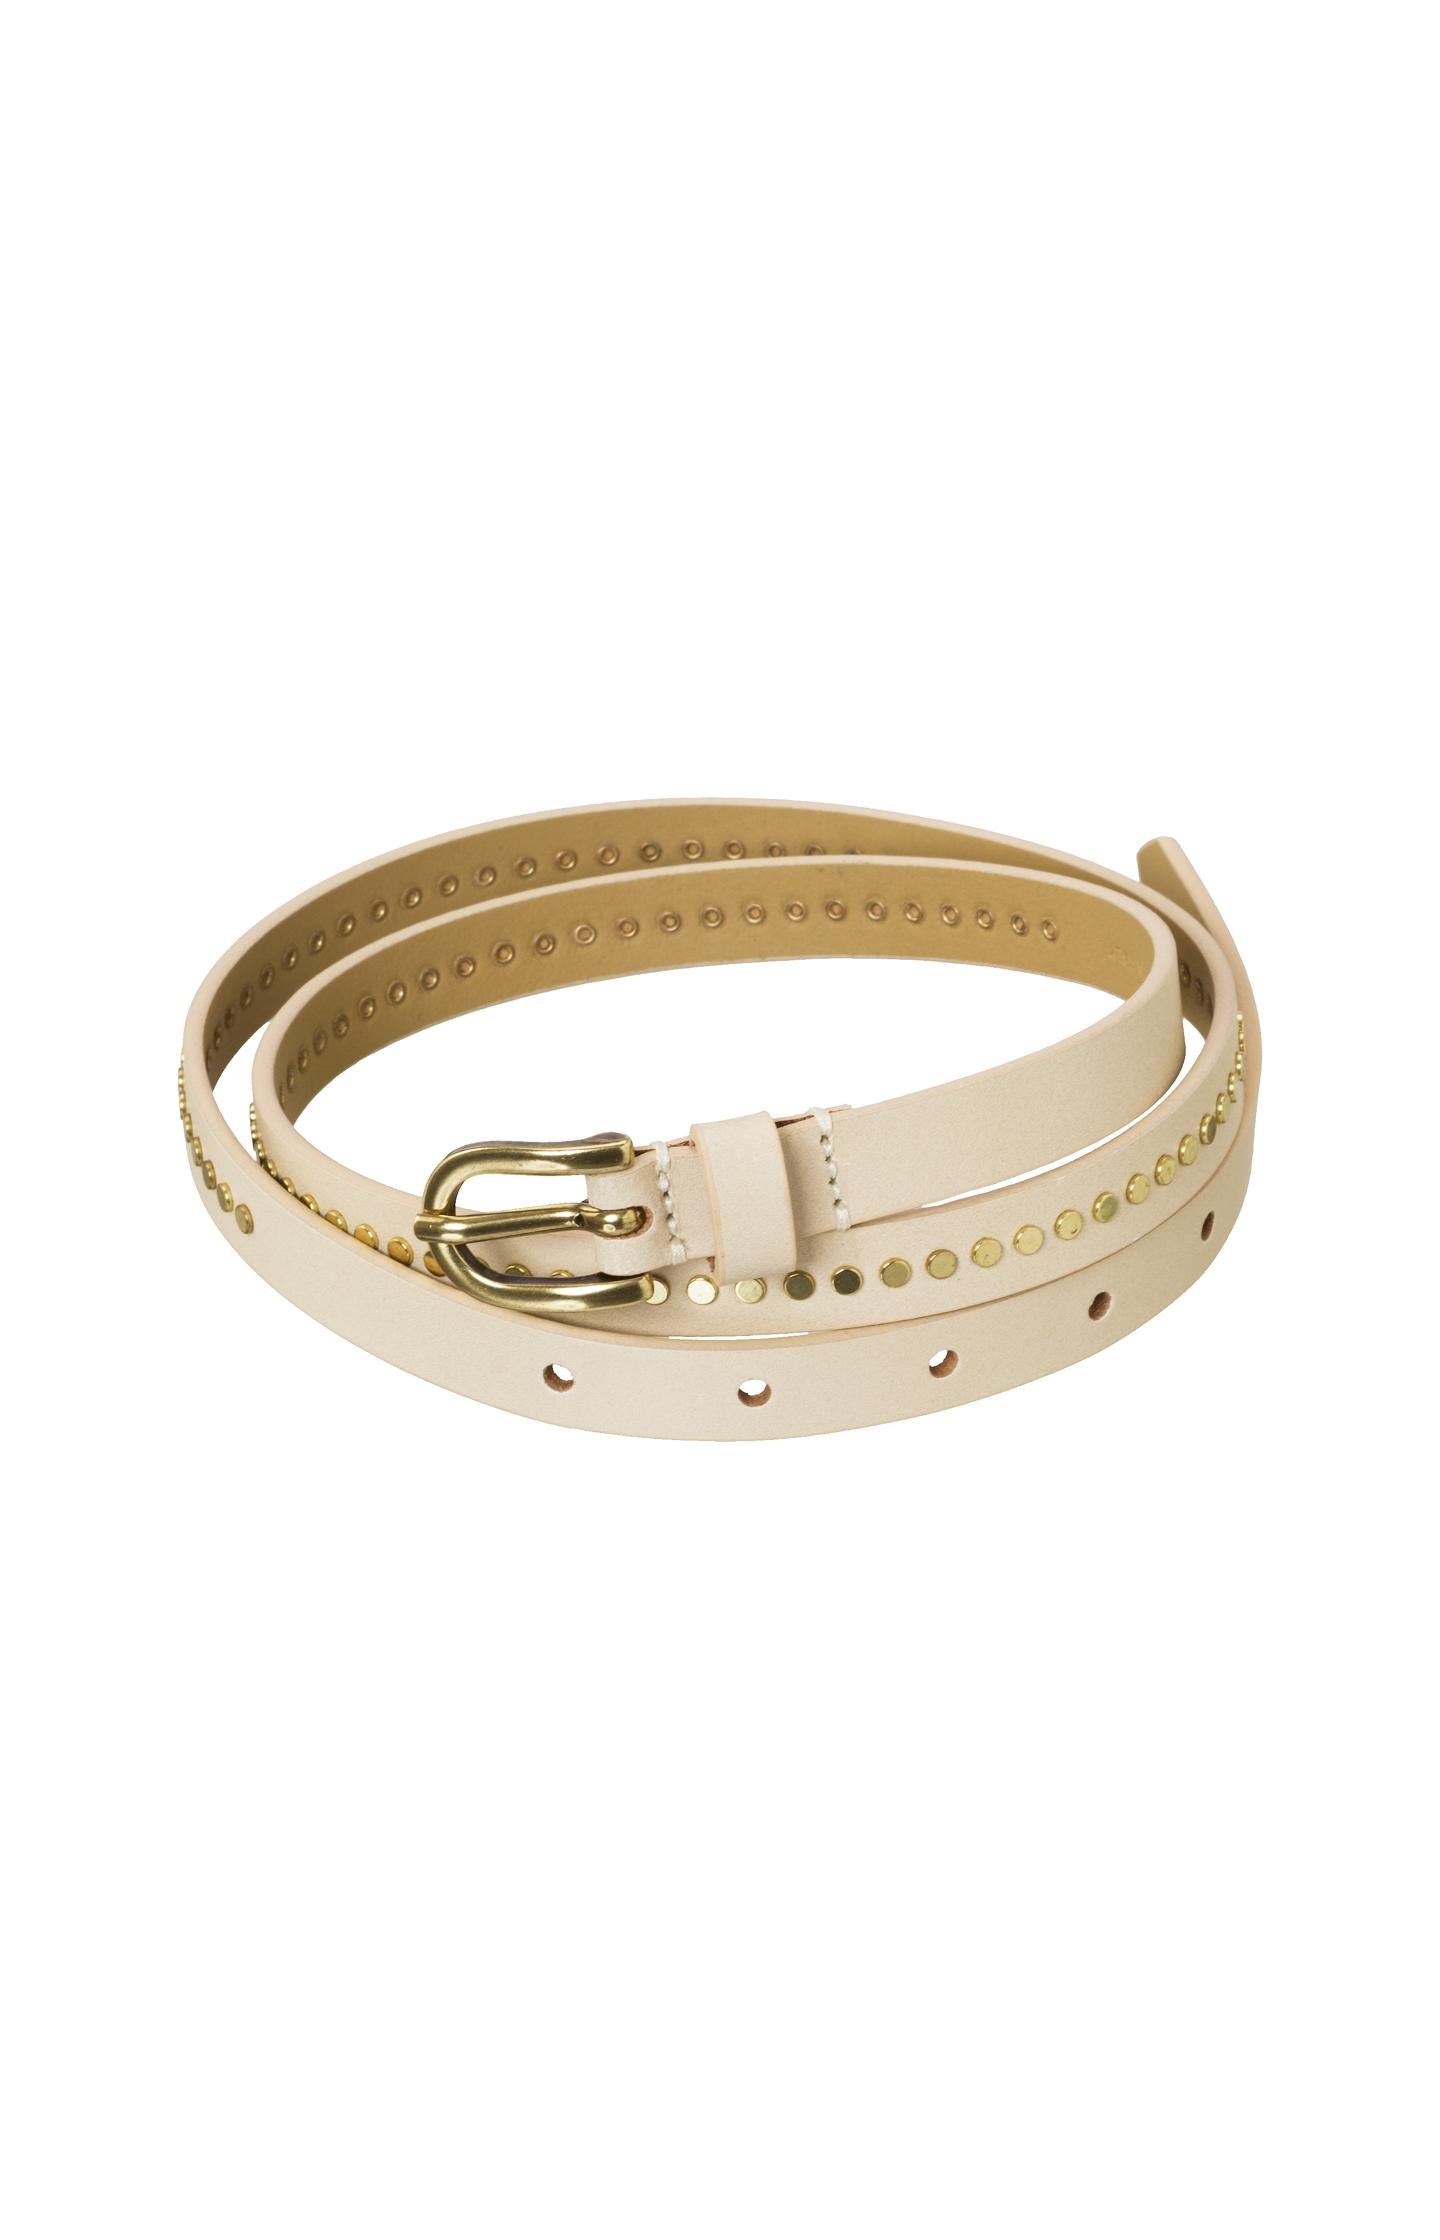 Small leather belt with subtle studs - Safari Sand - Type: product